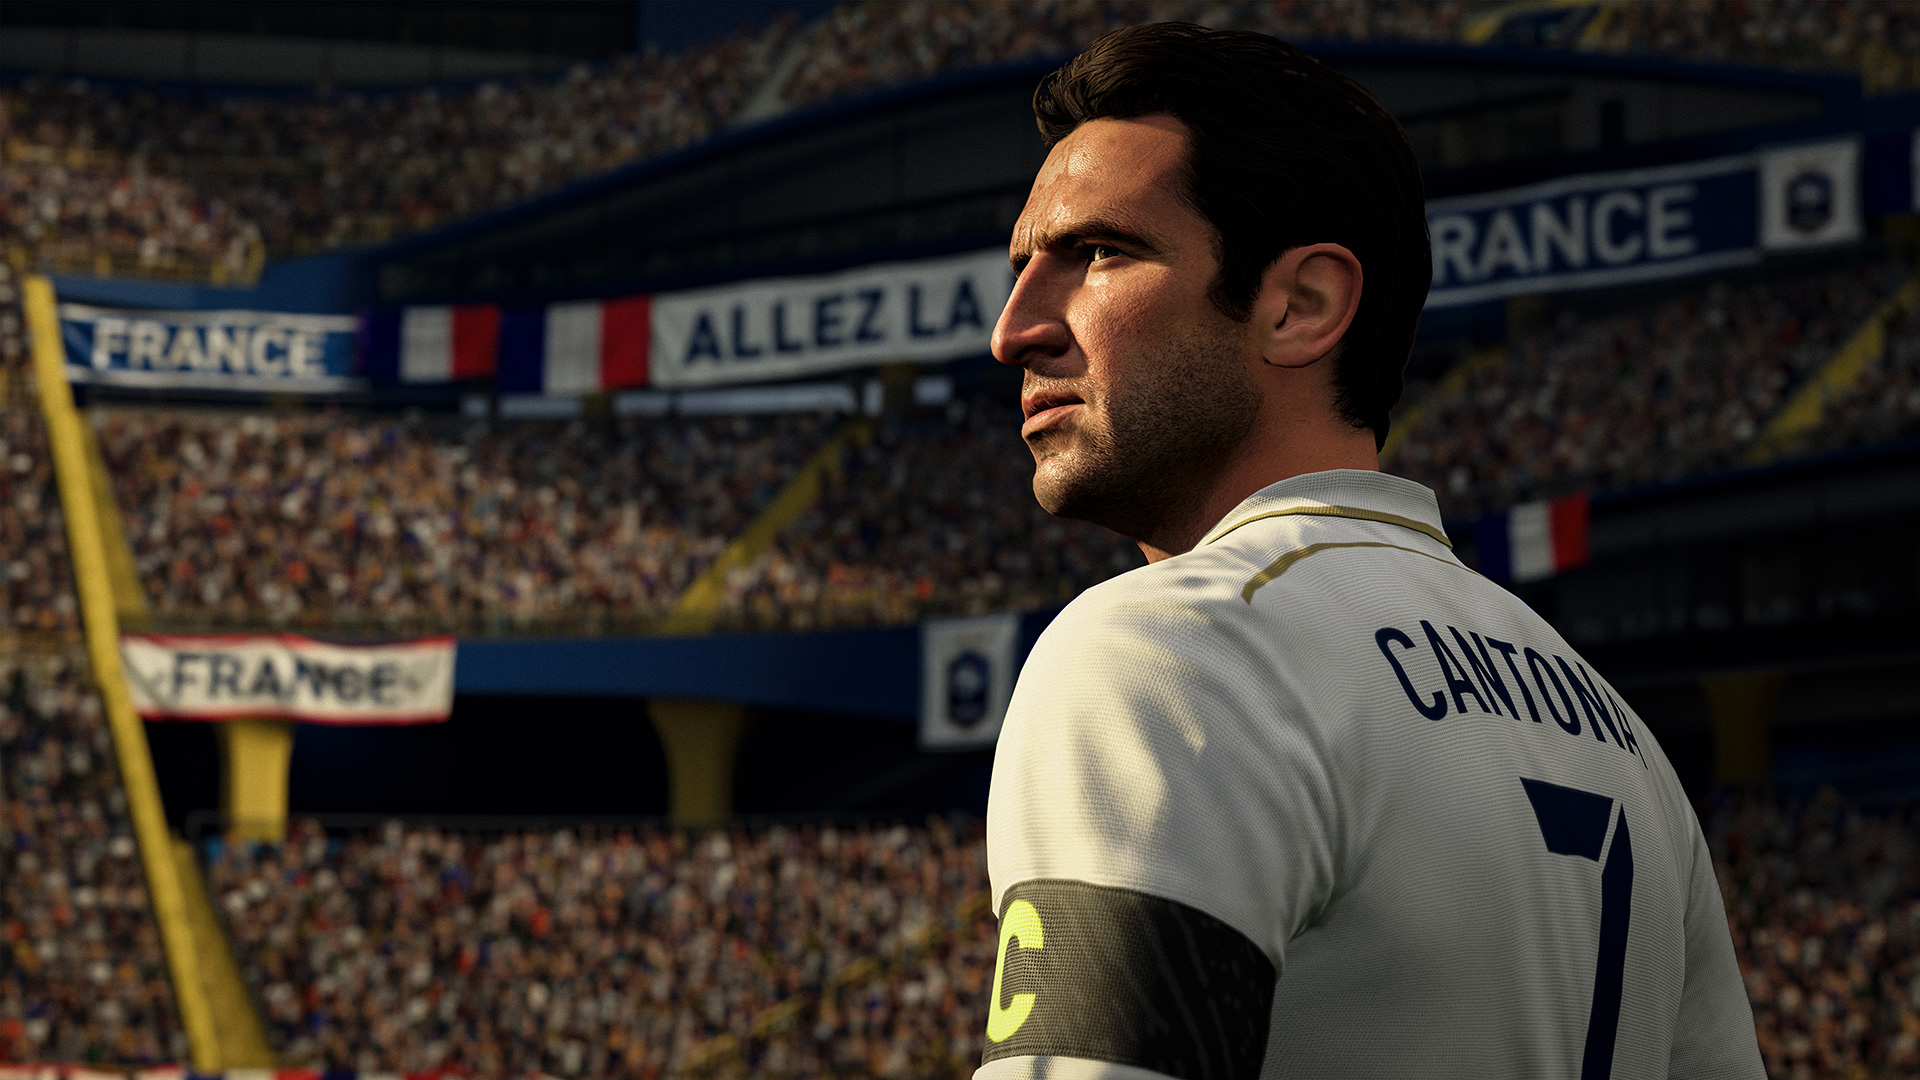 FIFA 21: The Icon roster will consist of 100 legends | FifaUltimateTeam